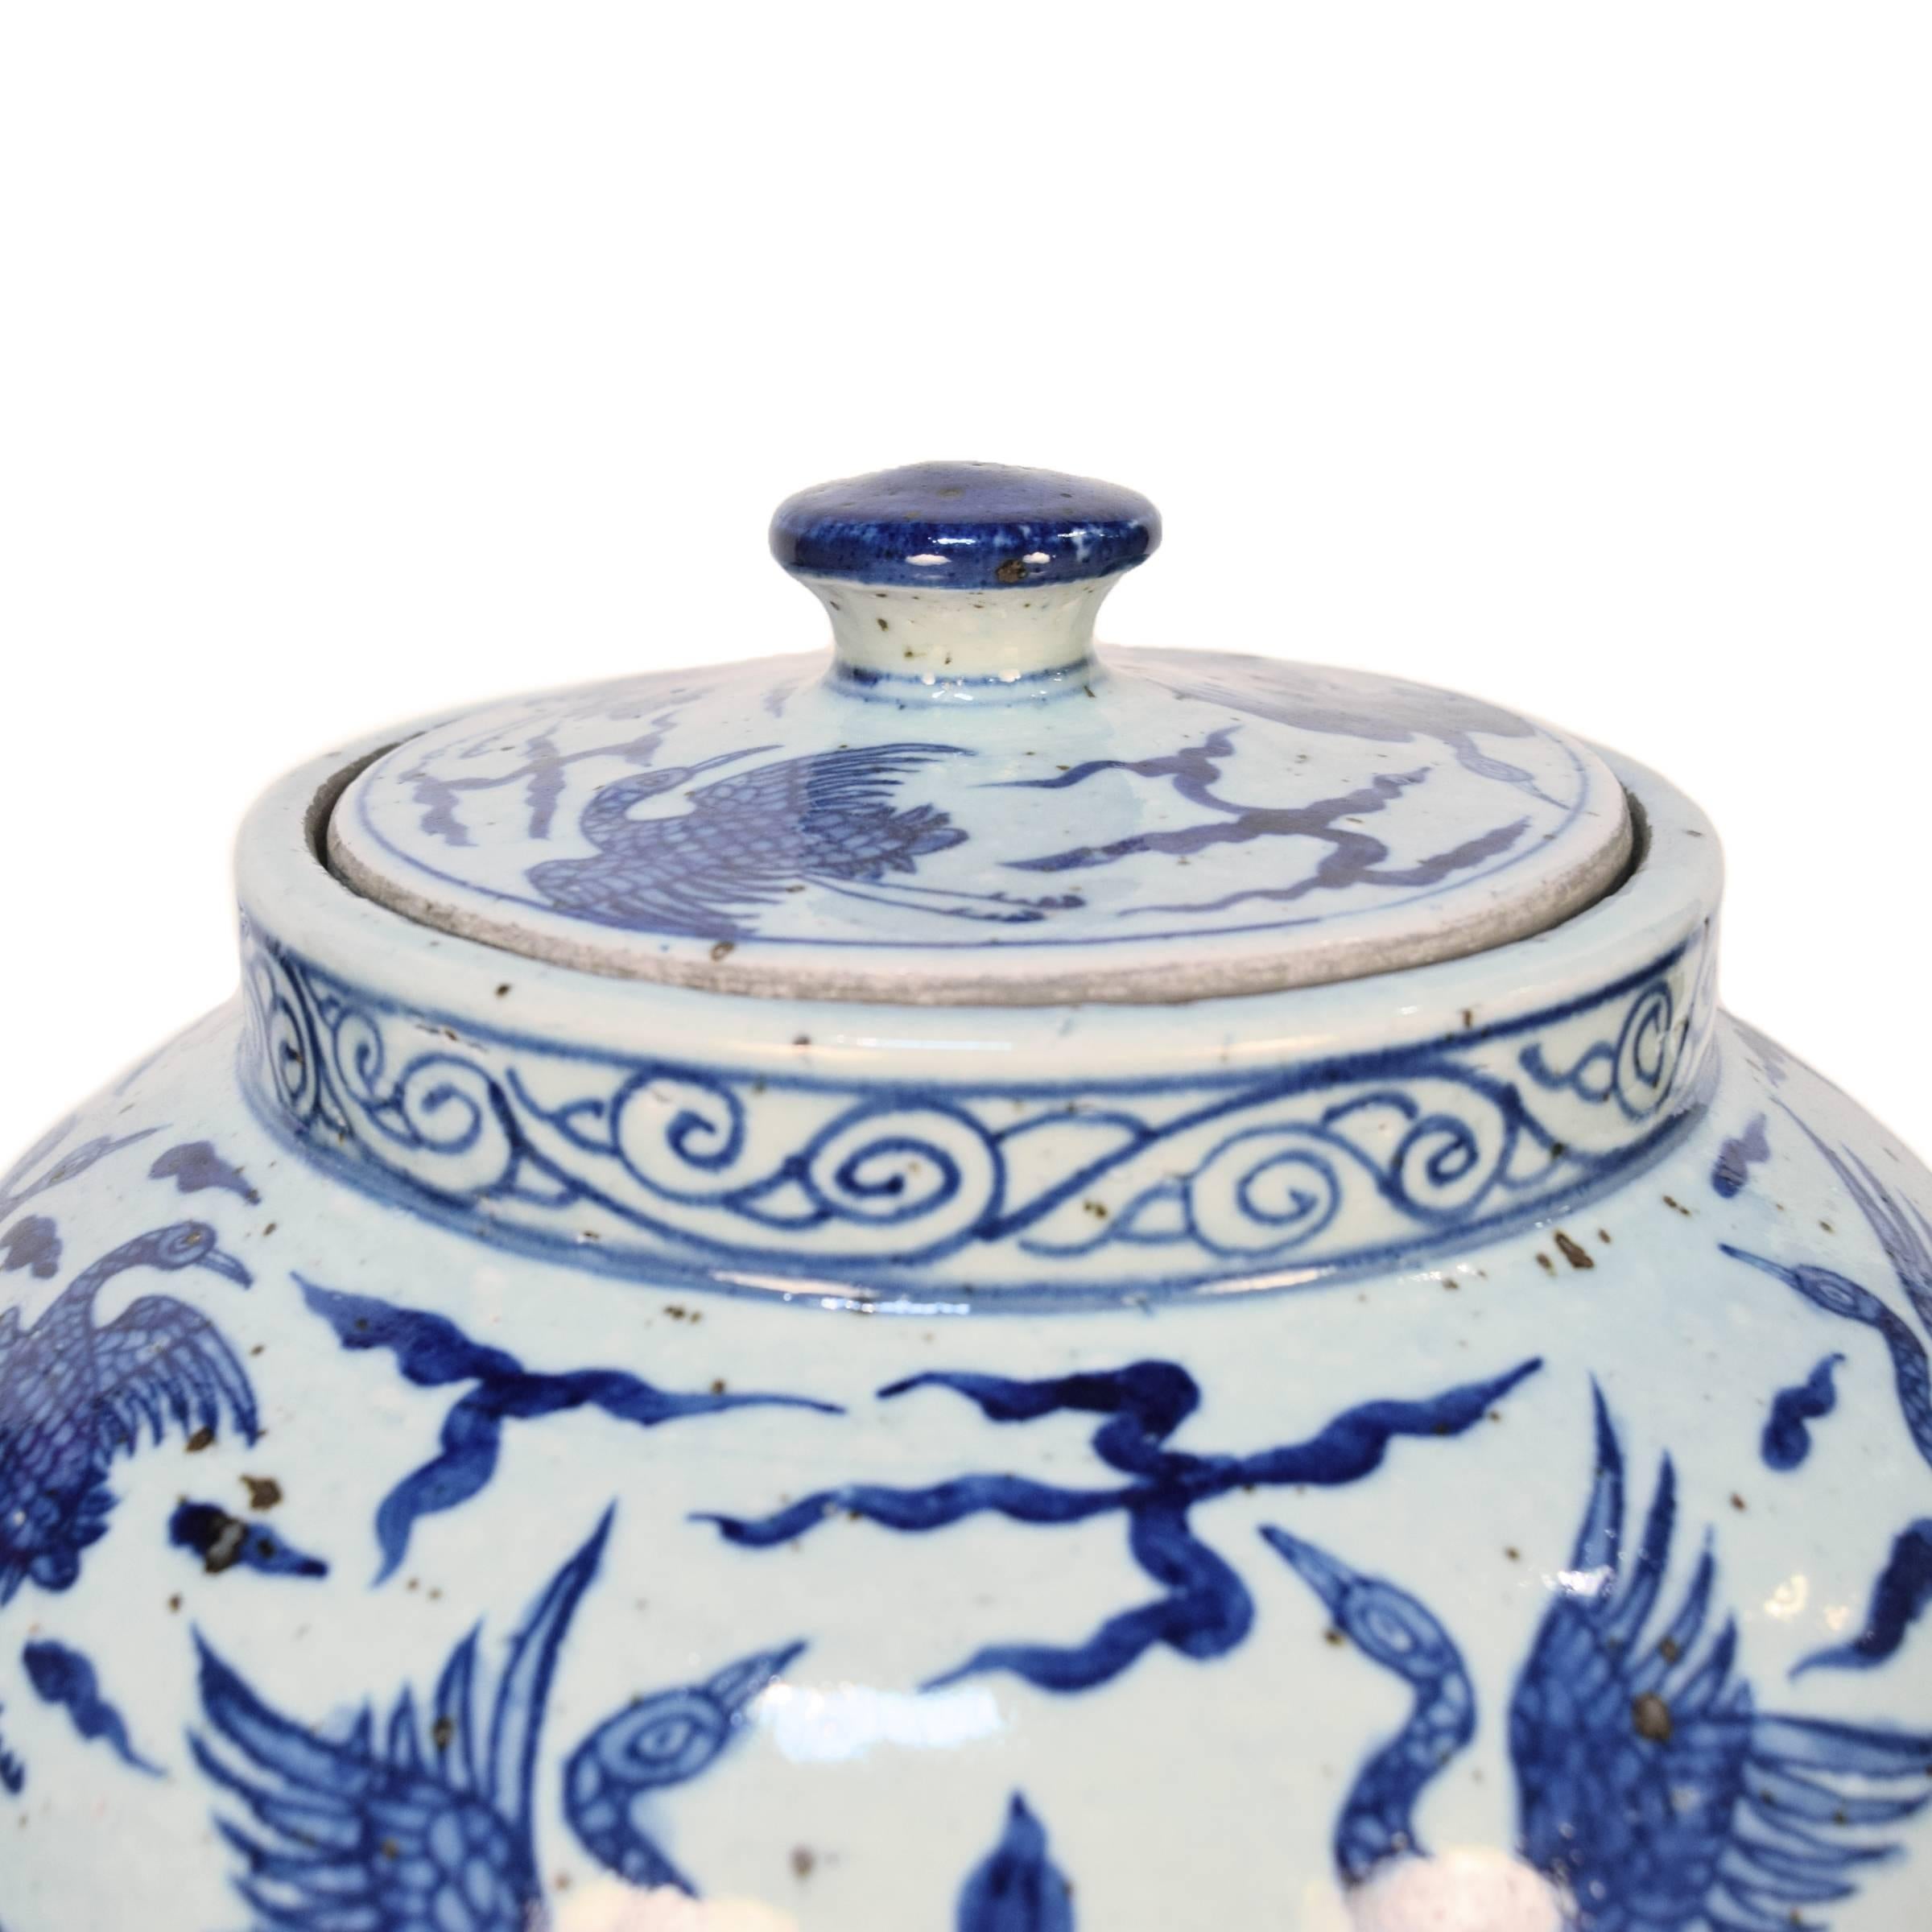 This elegant porcelain vase dates from the 19th century when such pieces became widely popular in China, the vase has a traditional blue and white floral design painted with intricate detail by a skilled artisan. Blue-and-white porcelain originated